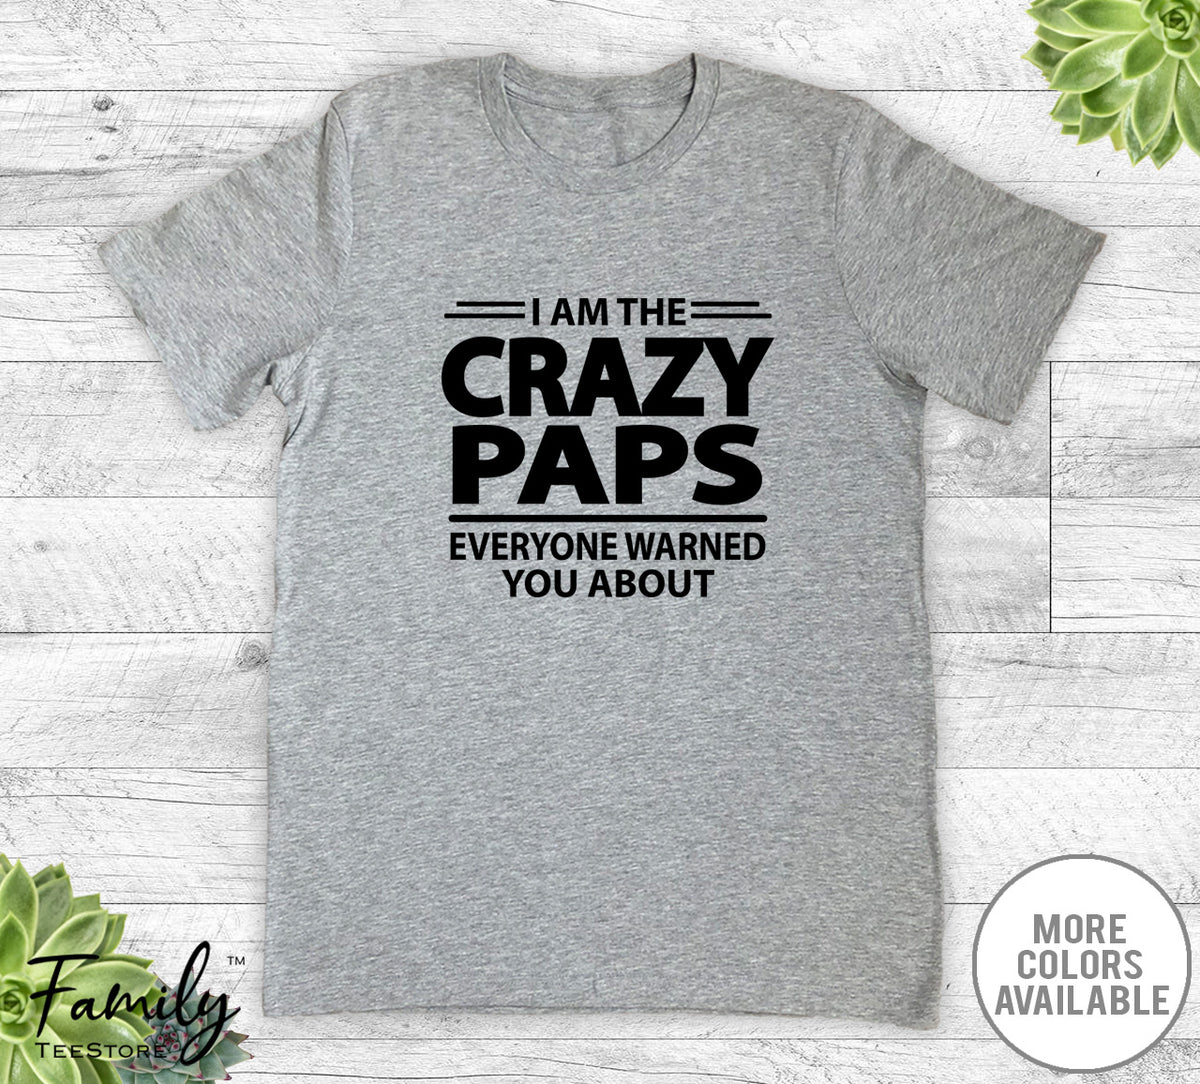 I Am The Crazy Paps Everyone Warned You About - Unisex T-shirt - Paps Shirt - Paps Gift